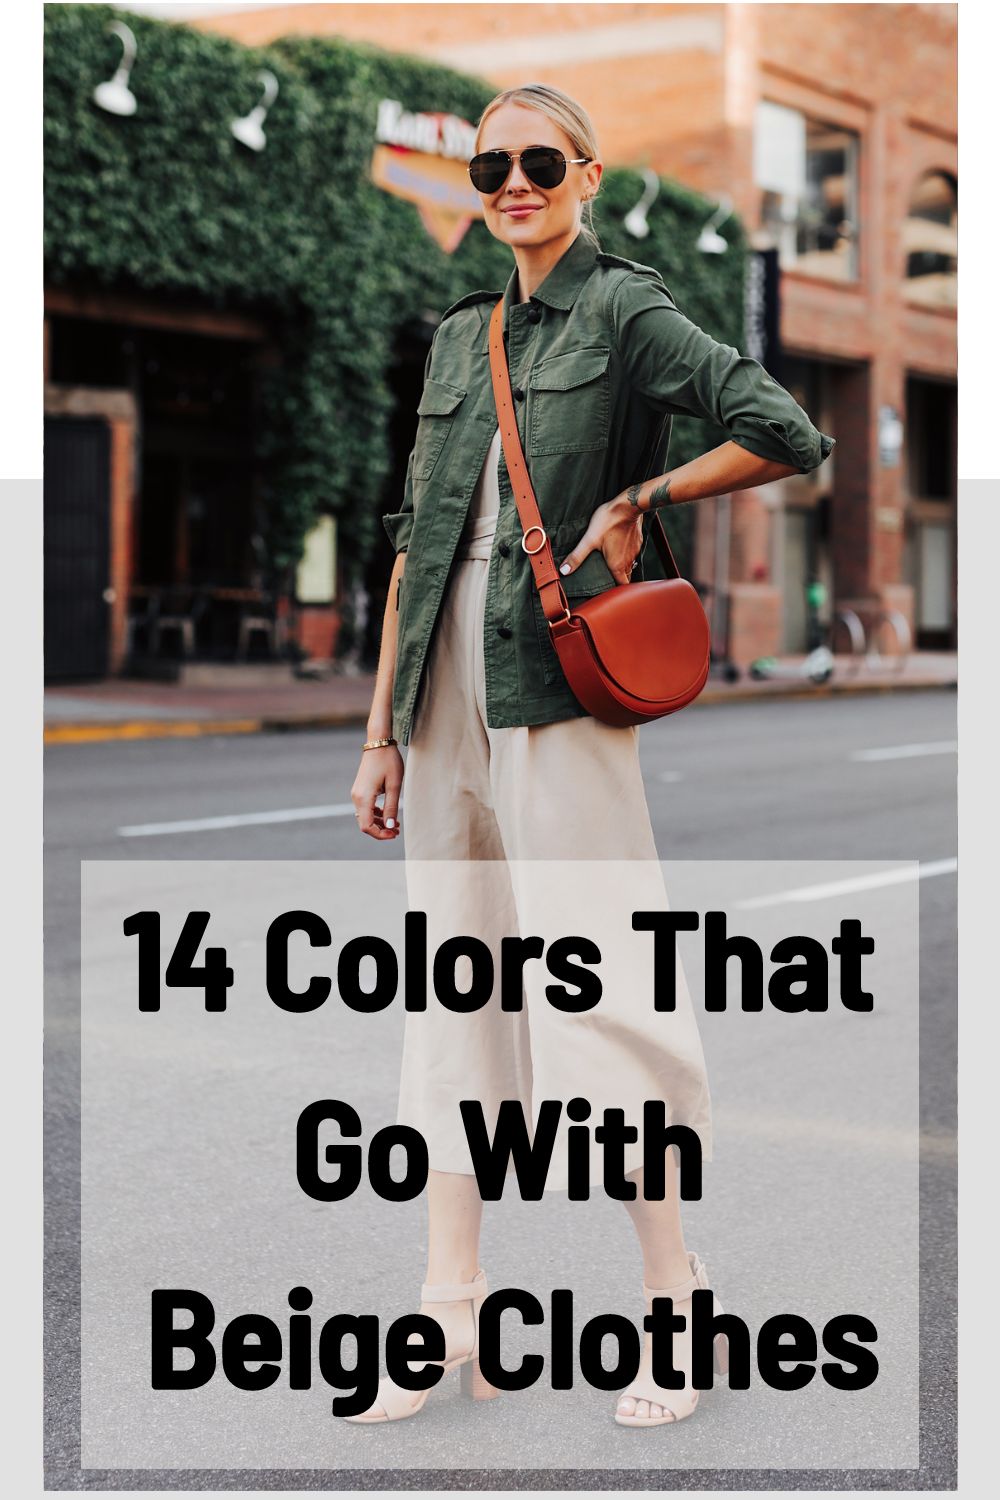 14 Colors That Go With Beige Clothes